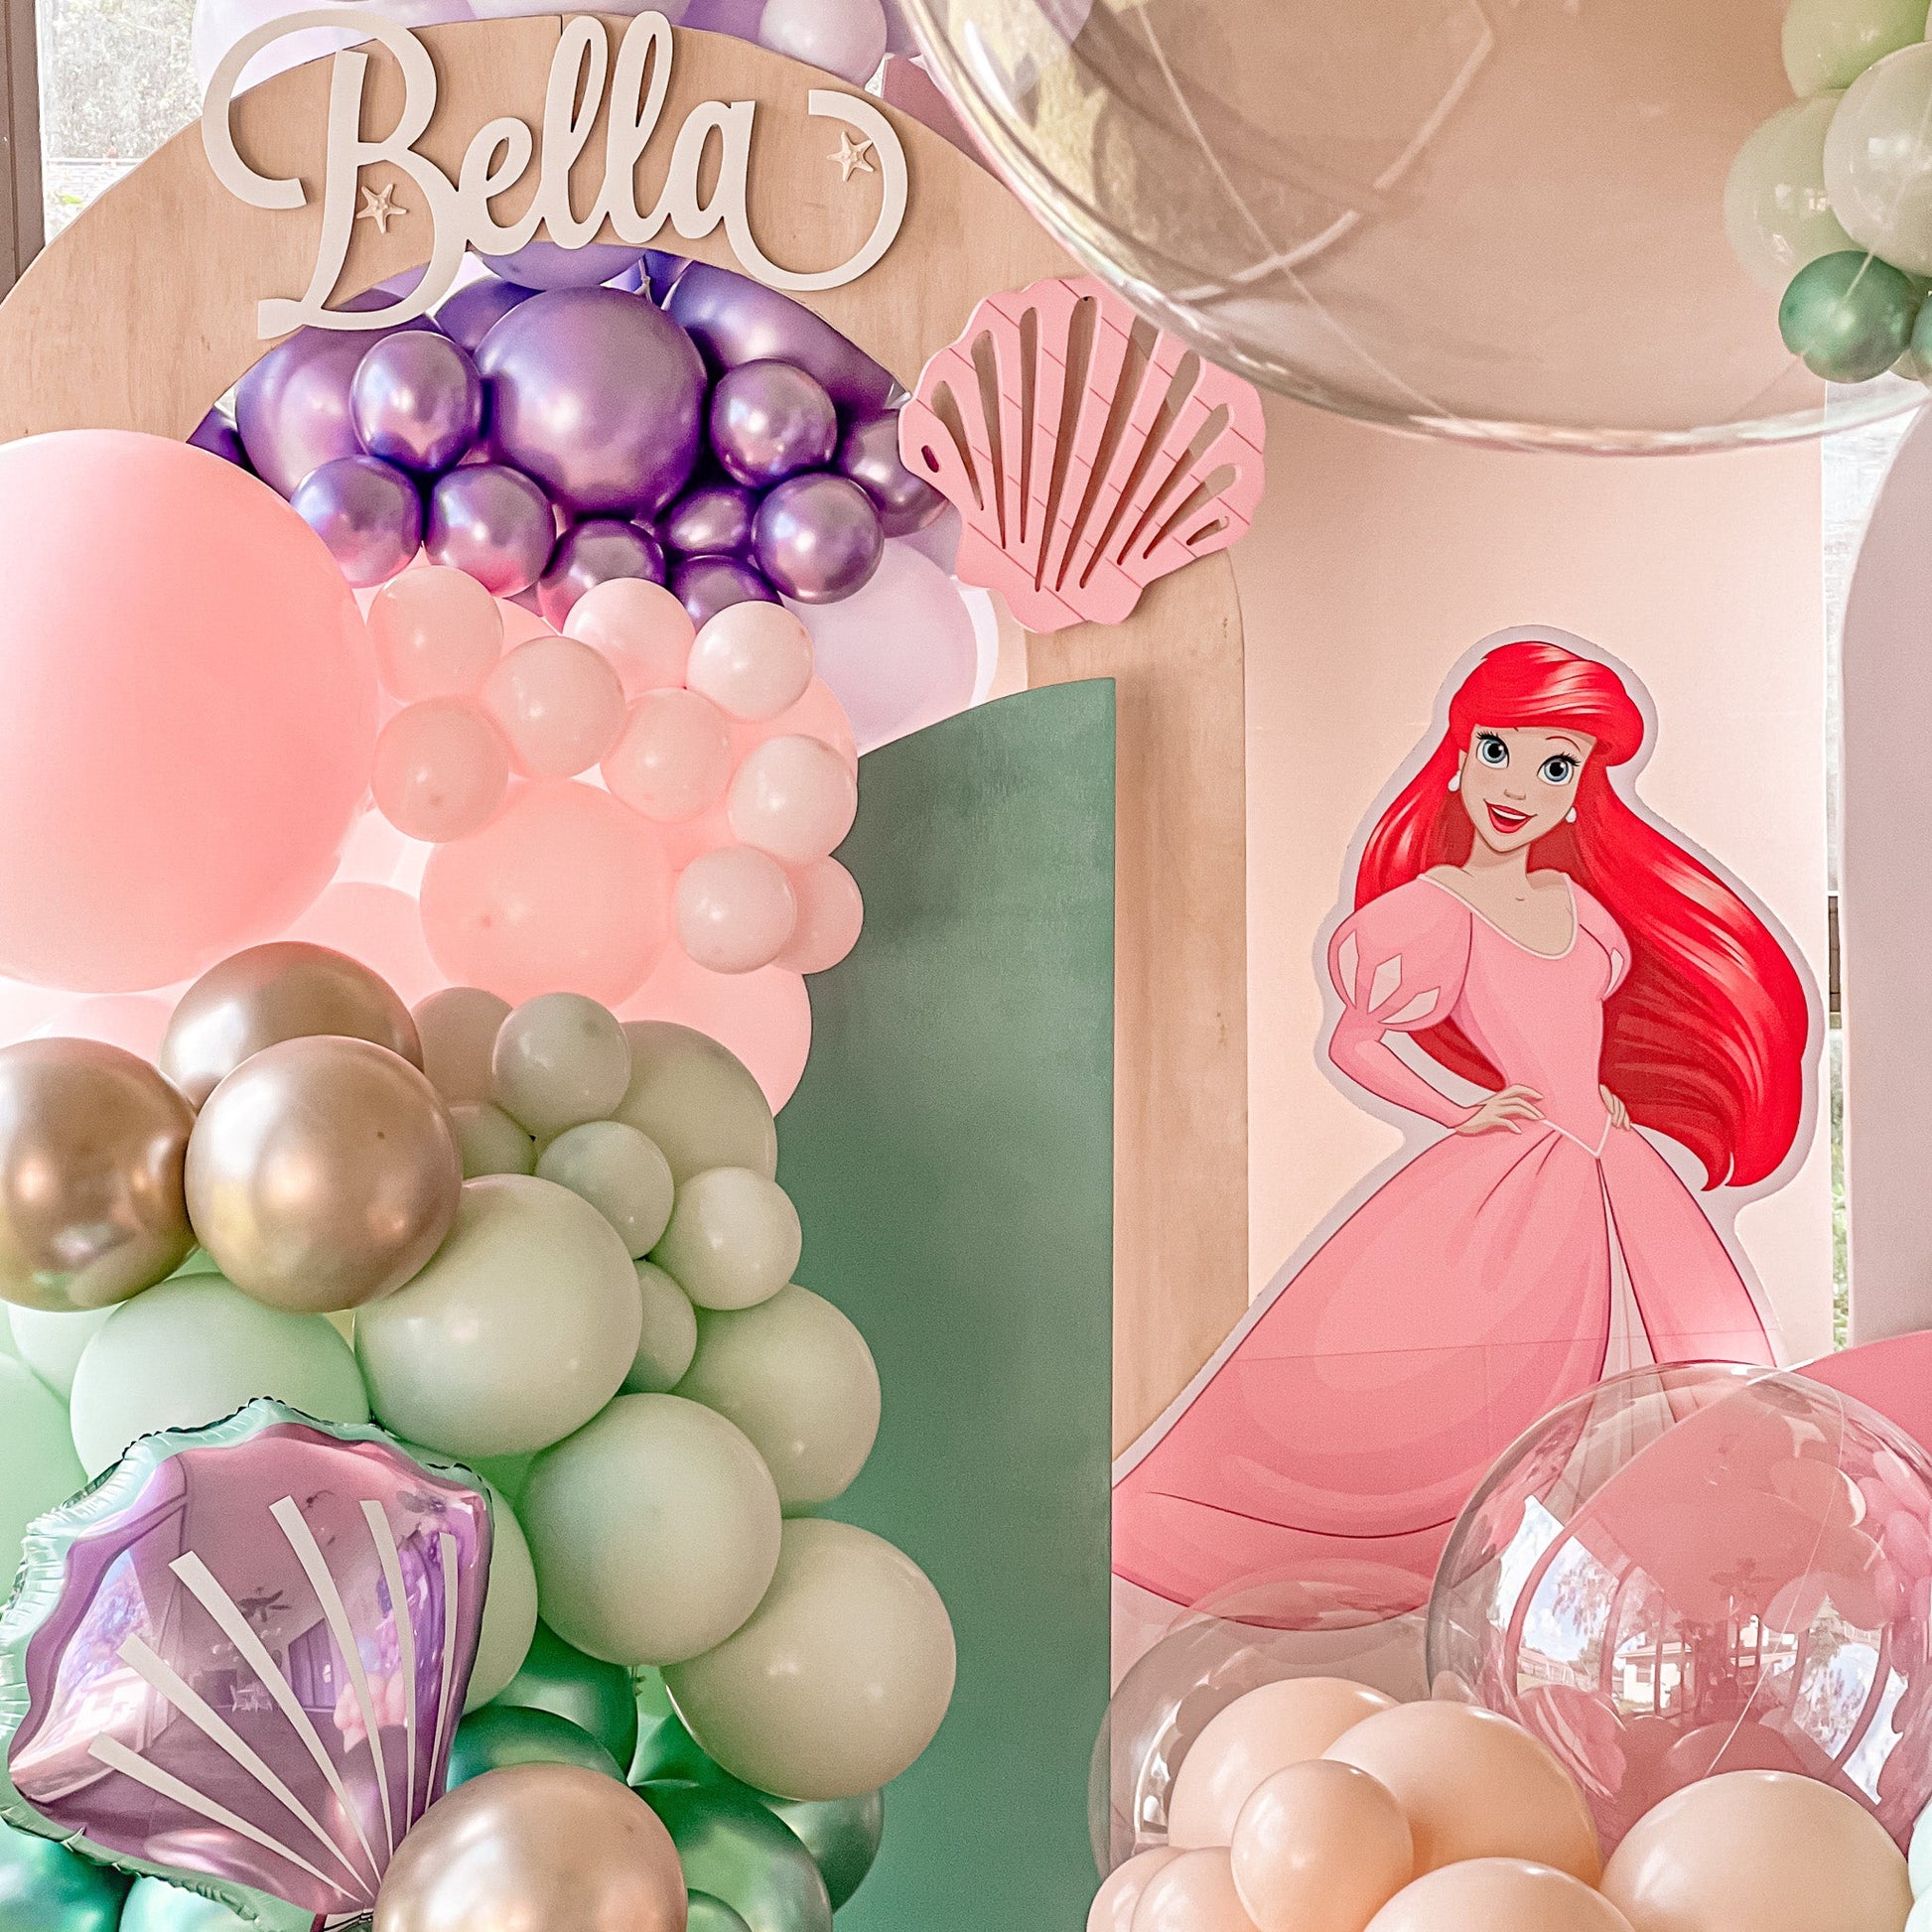 Pastel Balloon Garland - Forever and a Day Events